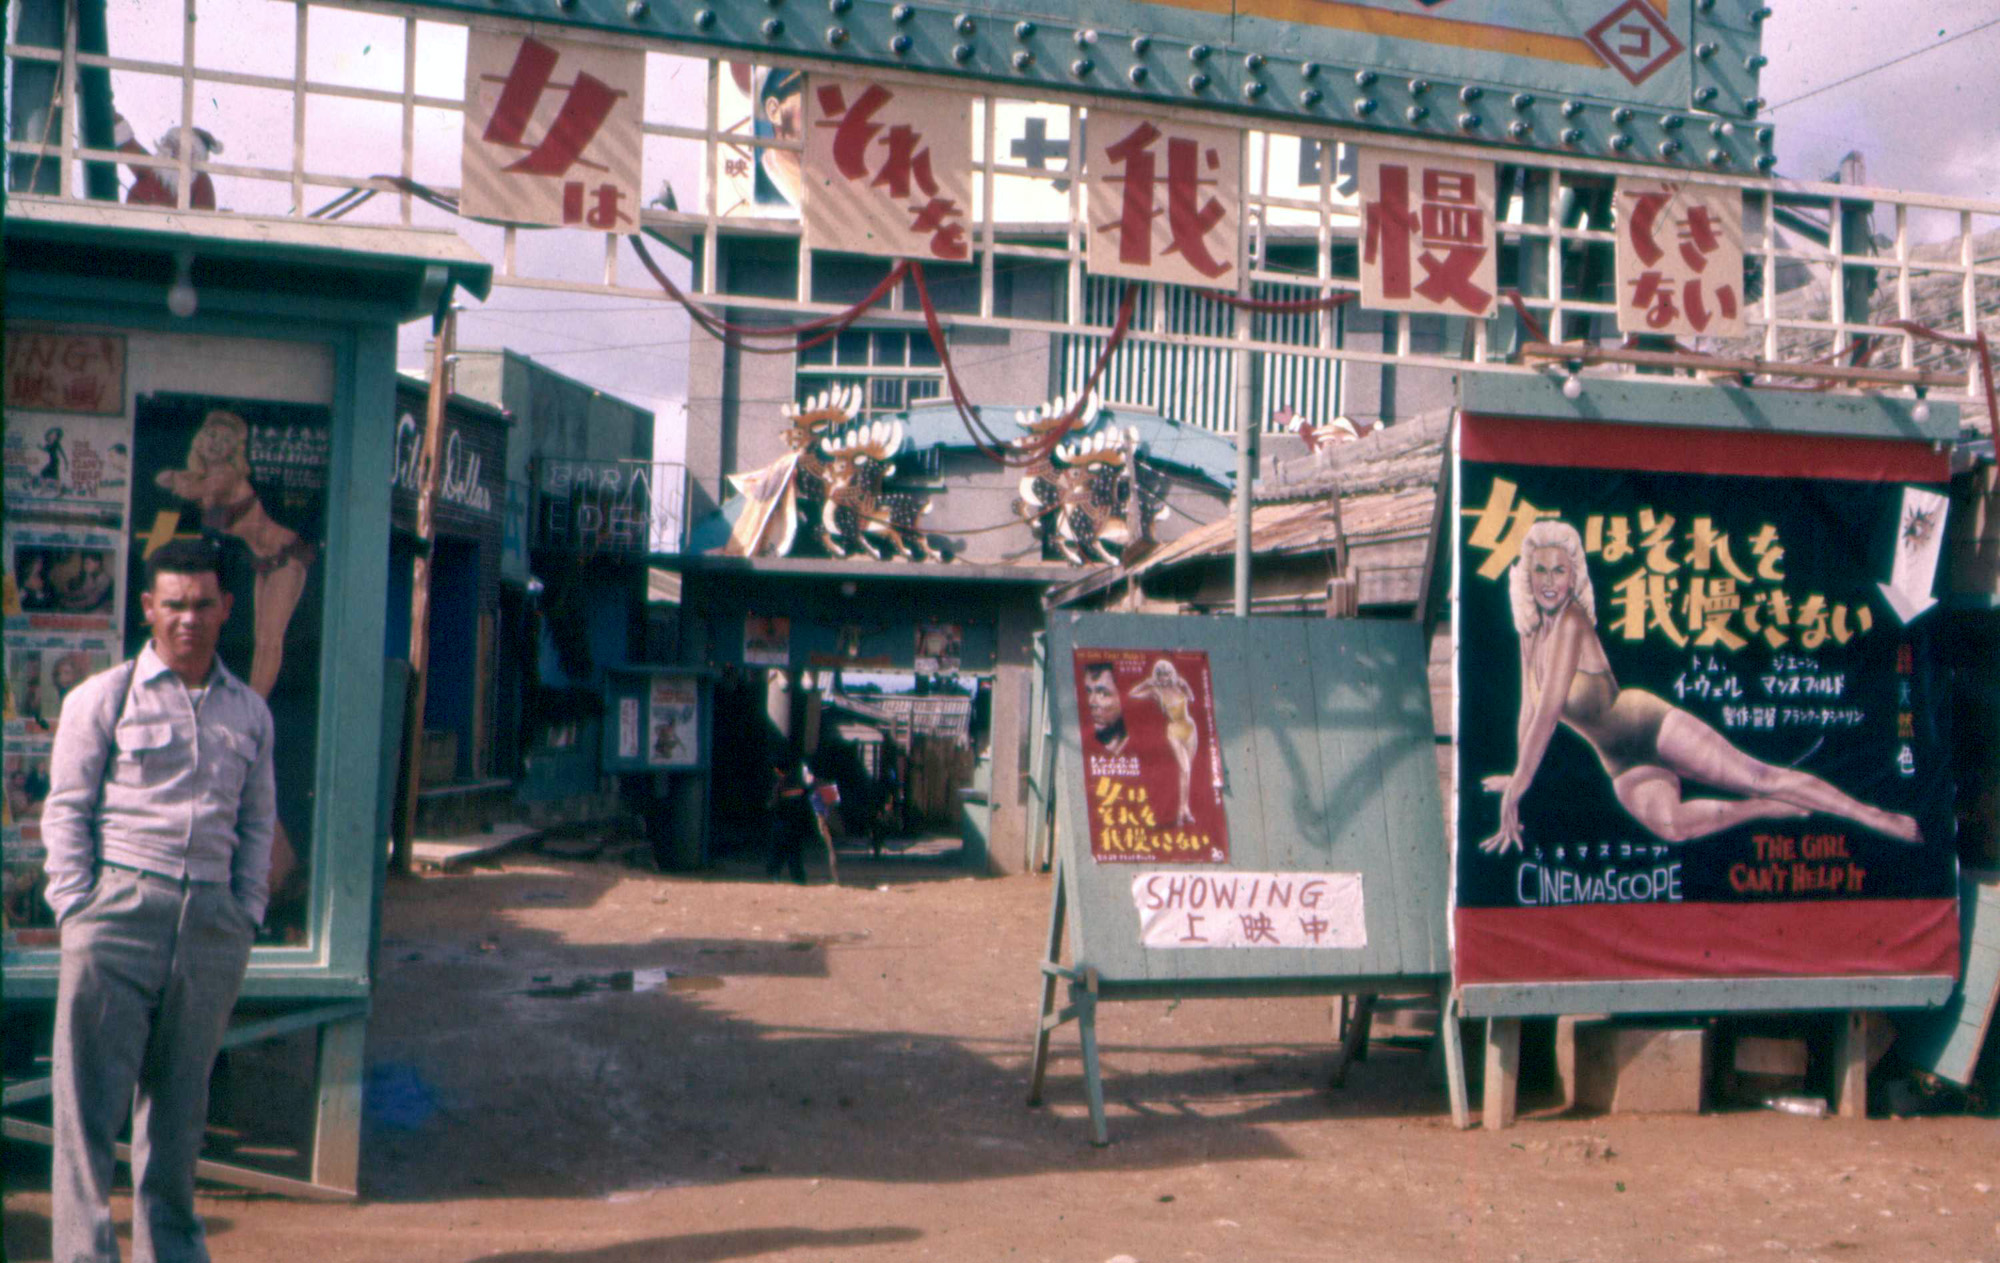 A movie theater entrance in Futenma, Okinawa, about 1957. Taken from one of my Dad's badly faded Ektachrome slides. Colors restored in a paint program. View full size.